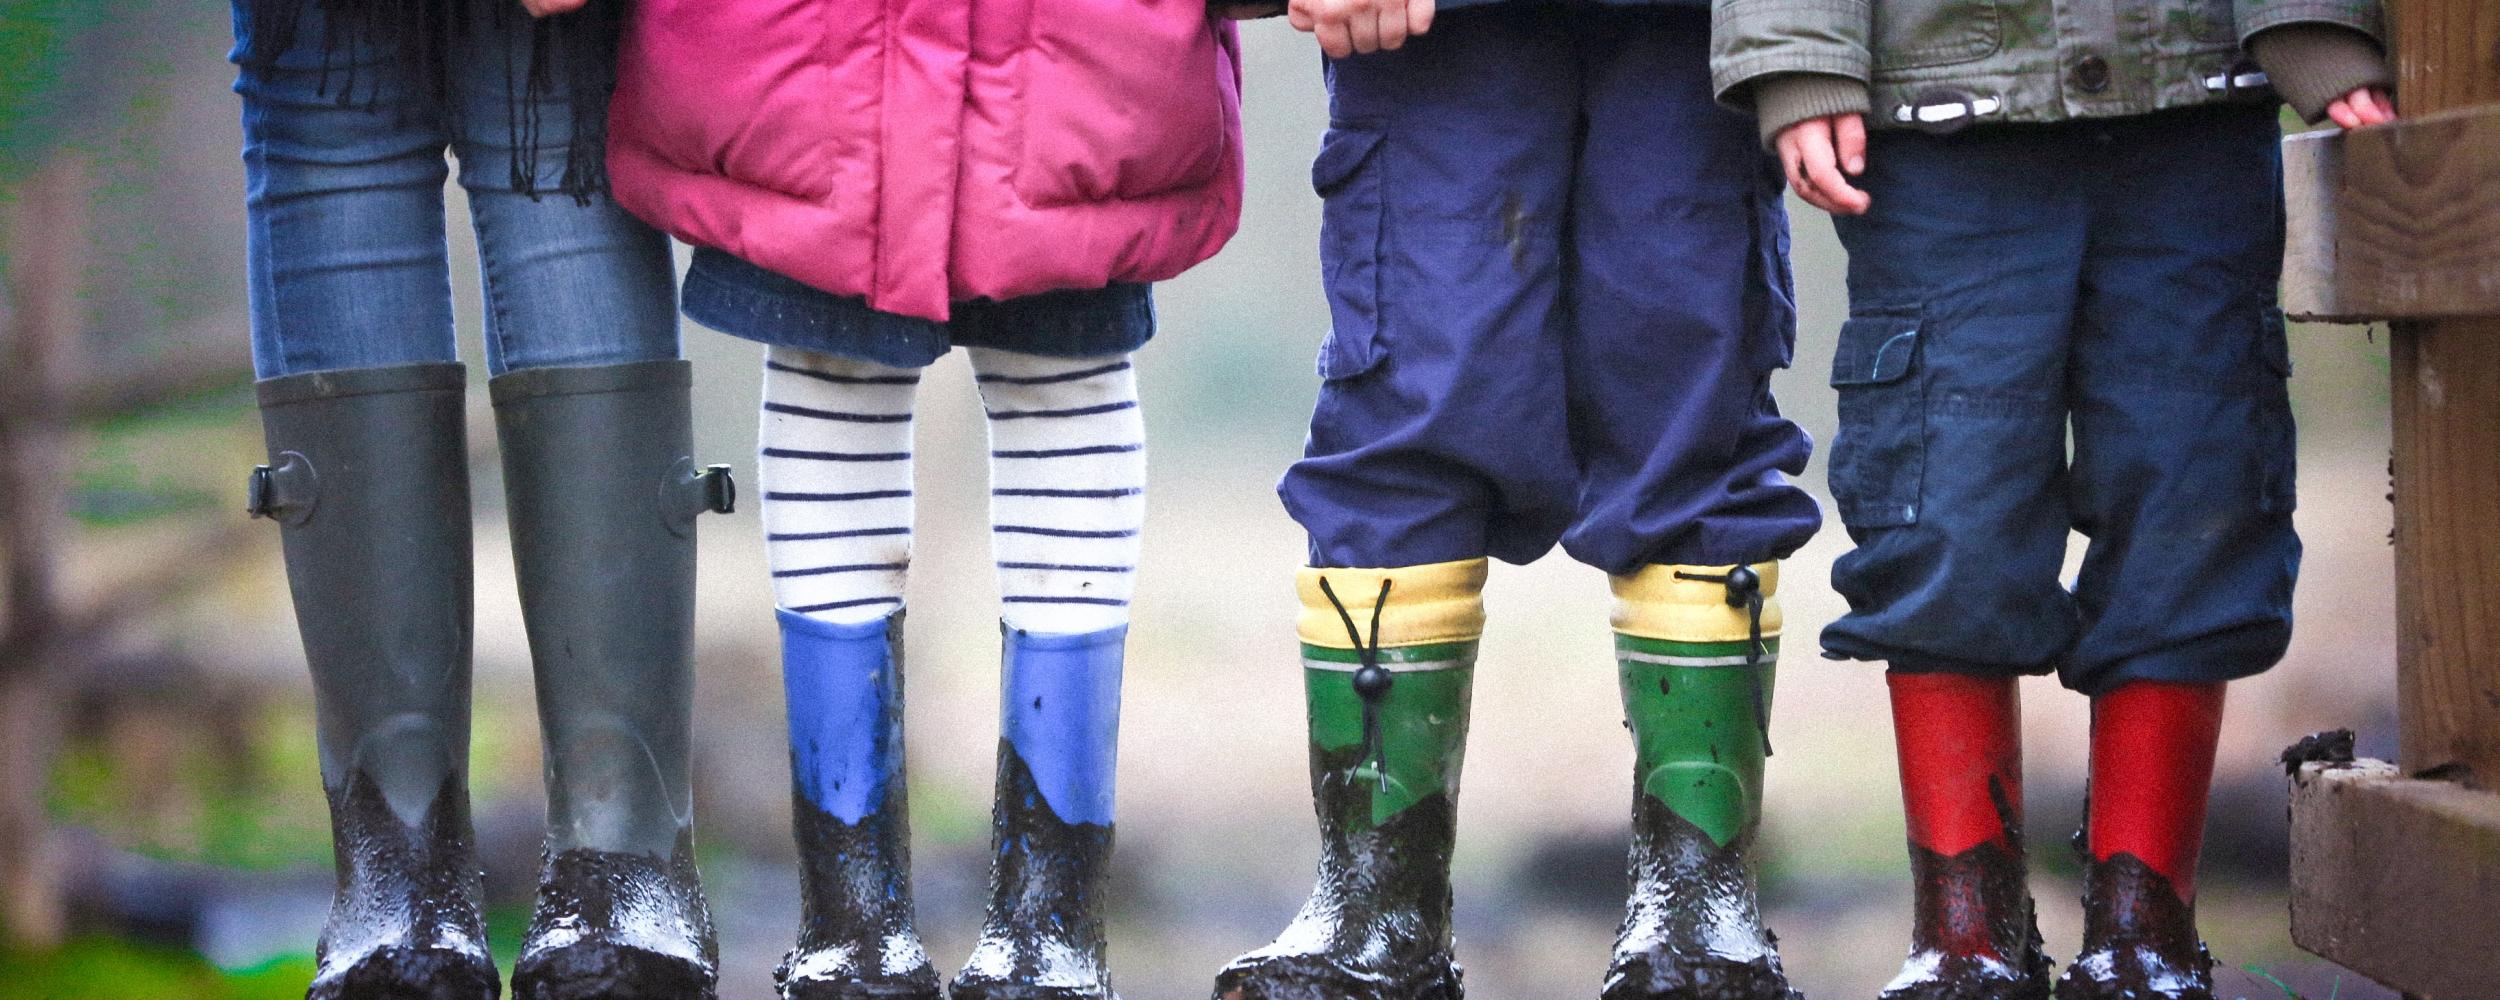 four children standing together. the picture focuses on the children's galoshes and coats